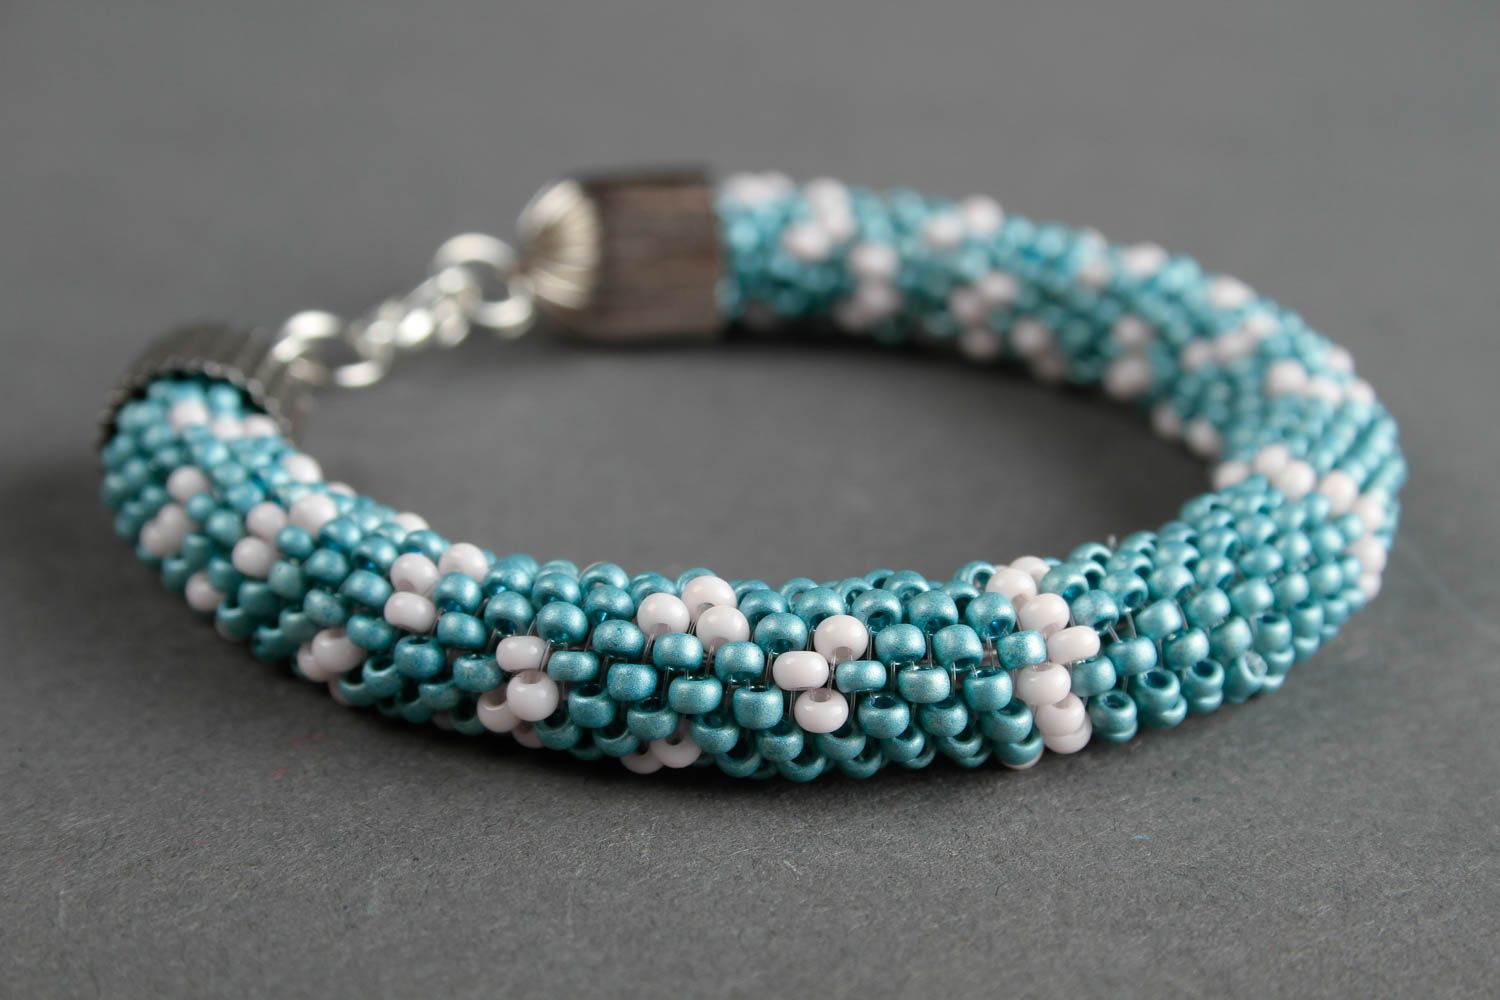 Handmade beaded cord bracelet in turquoise and white beads photo 3